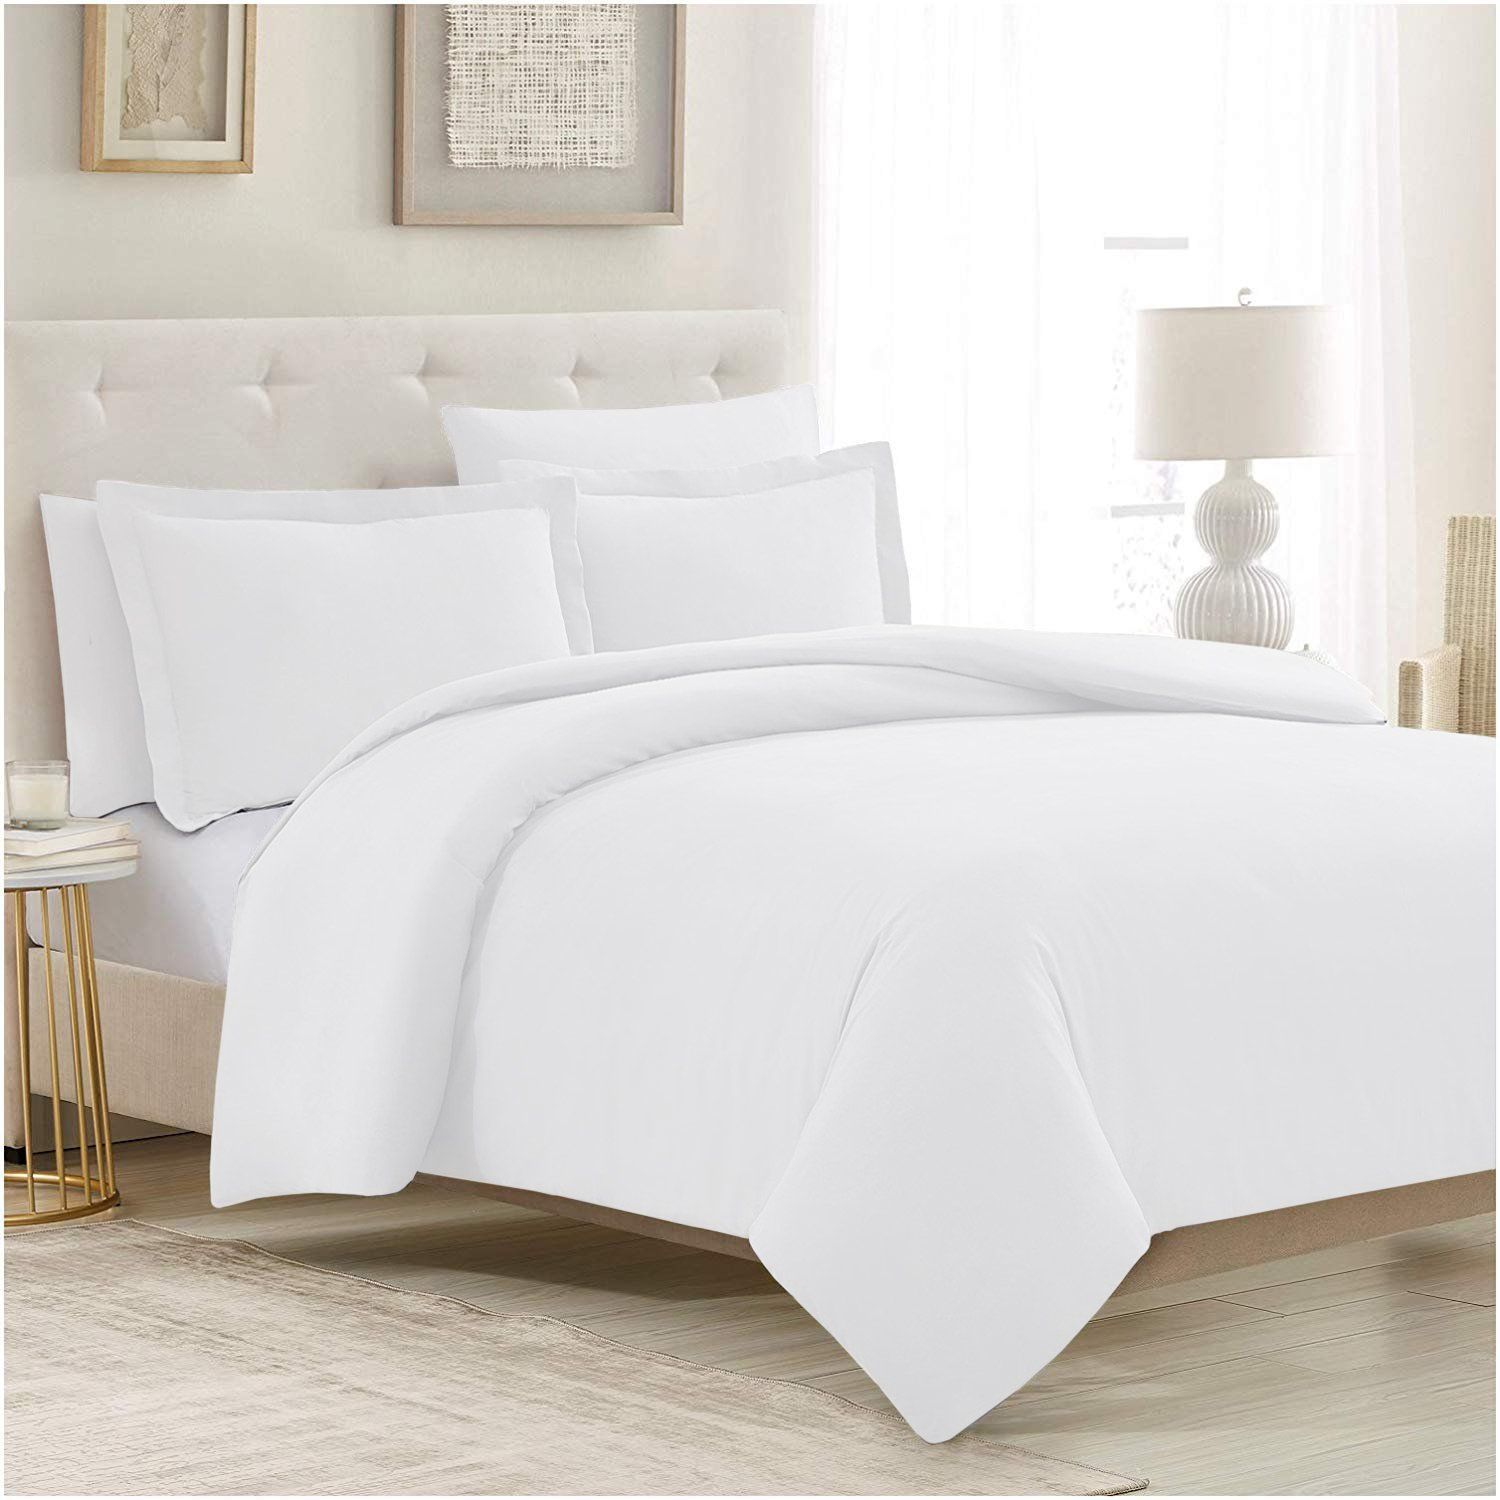 10 Best Duvet Covers Top Rated, What Is The Measurement Of A Queen Duvet Cover